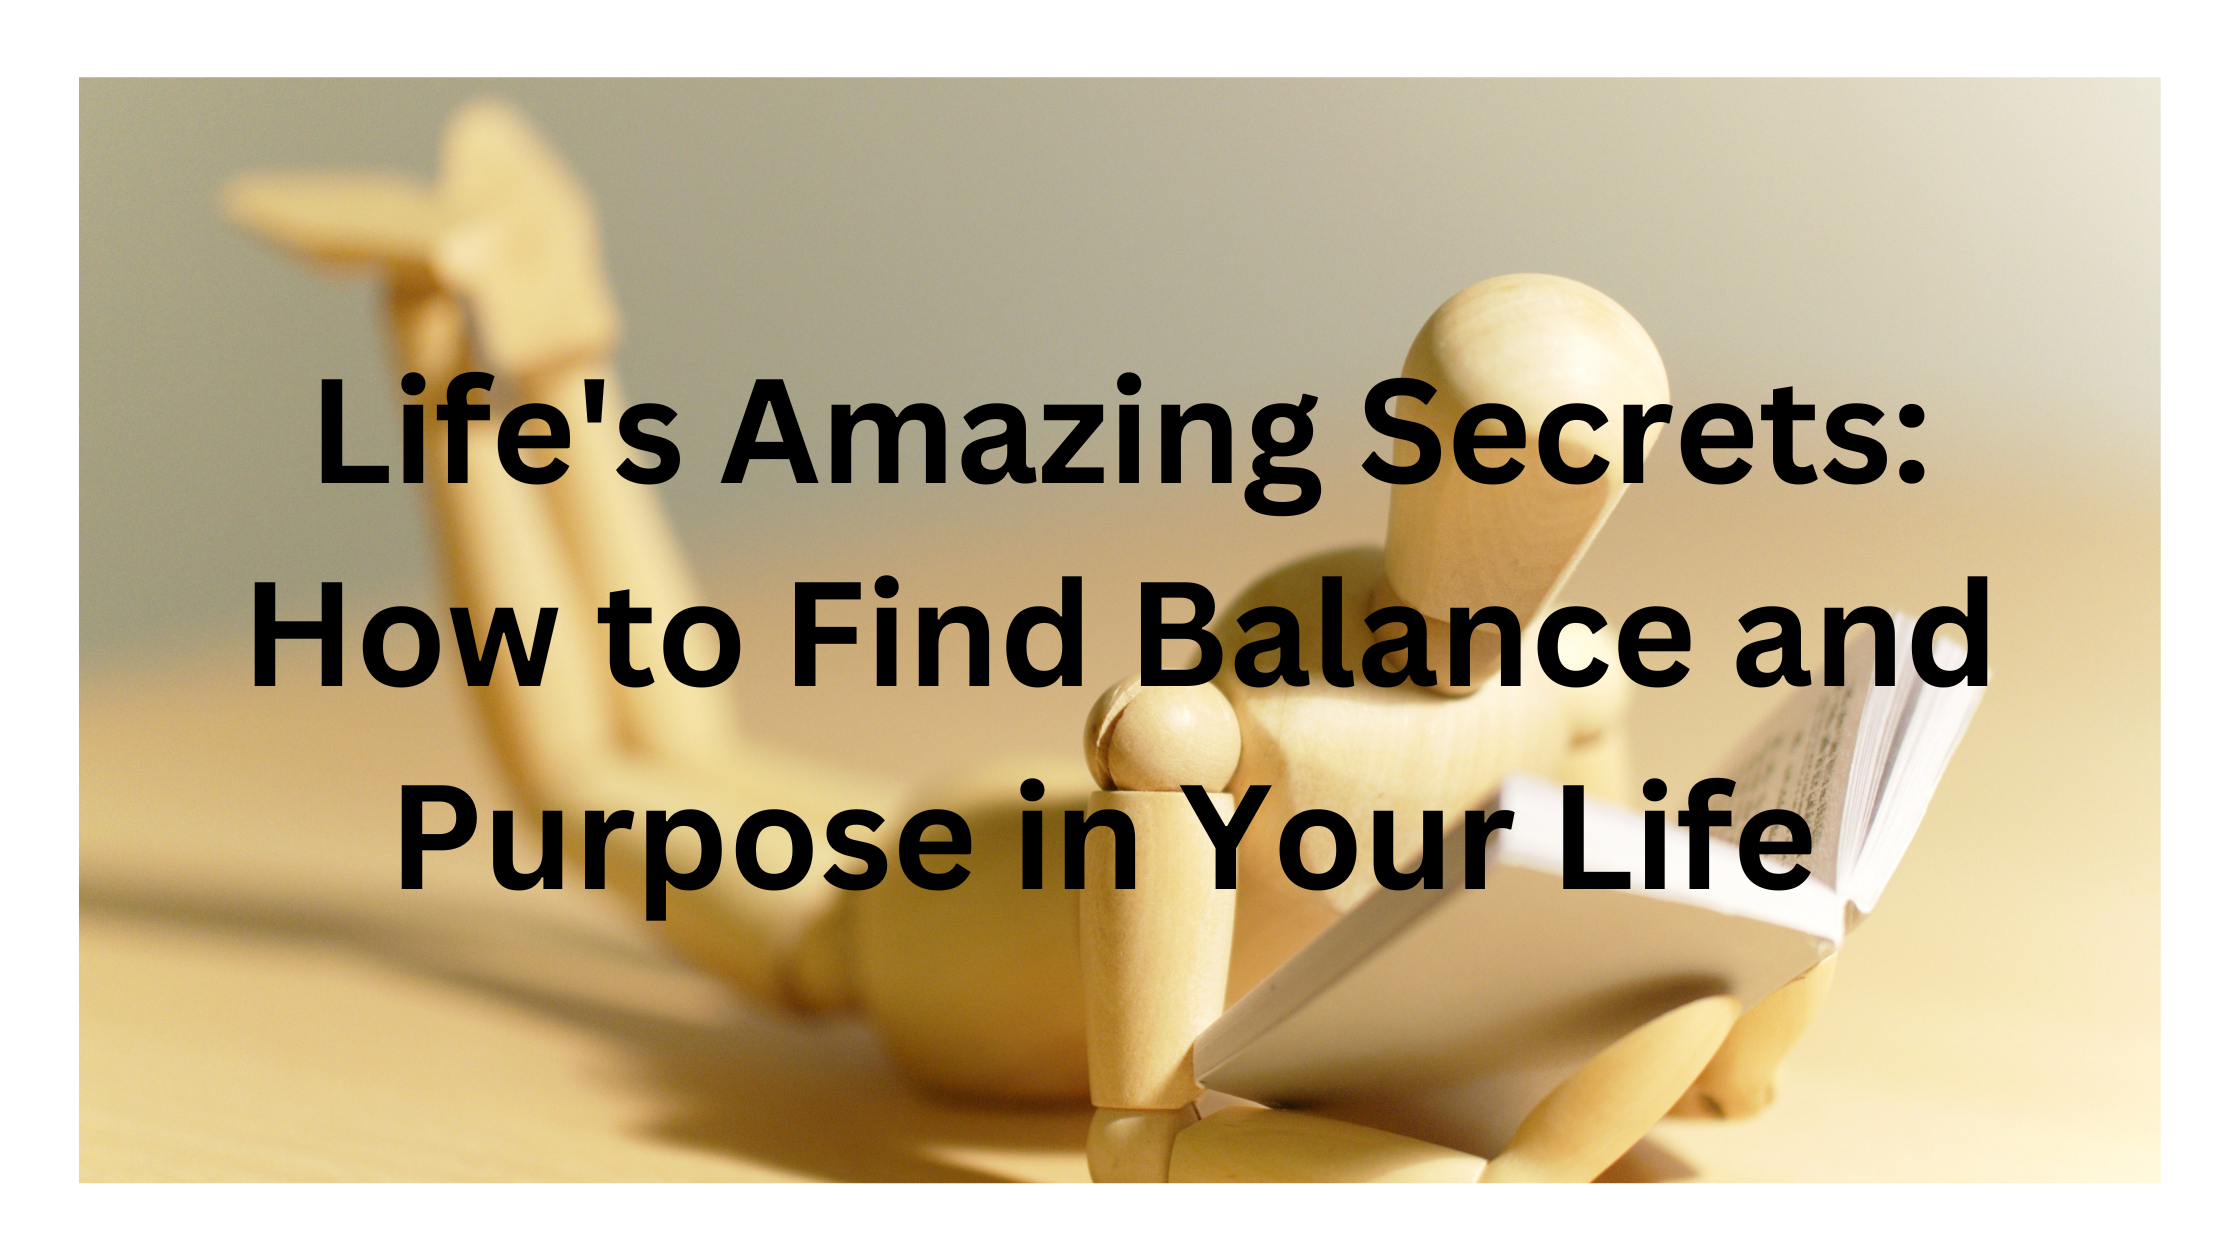 Life's Amazing Secrets- How to Find Balance and Purpose in Your Life by Gaur Gopal Das